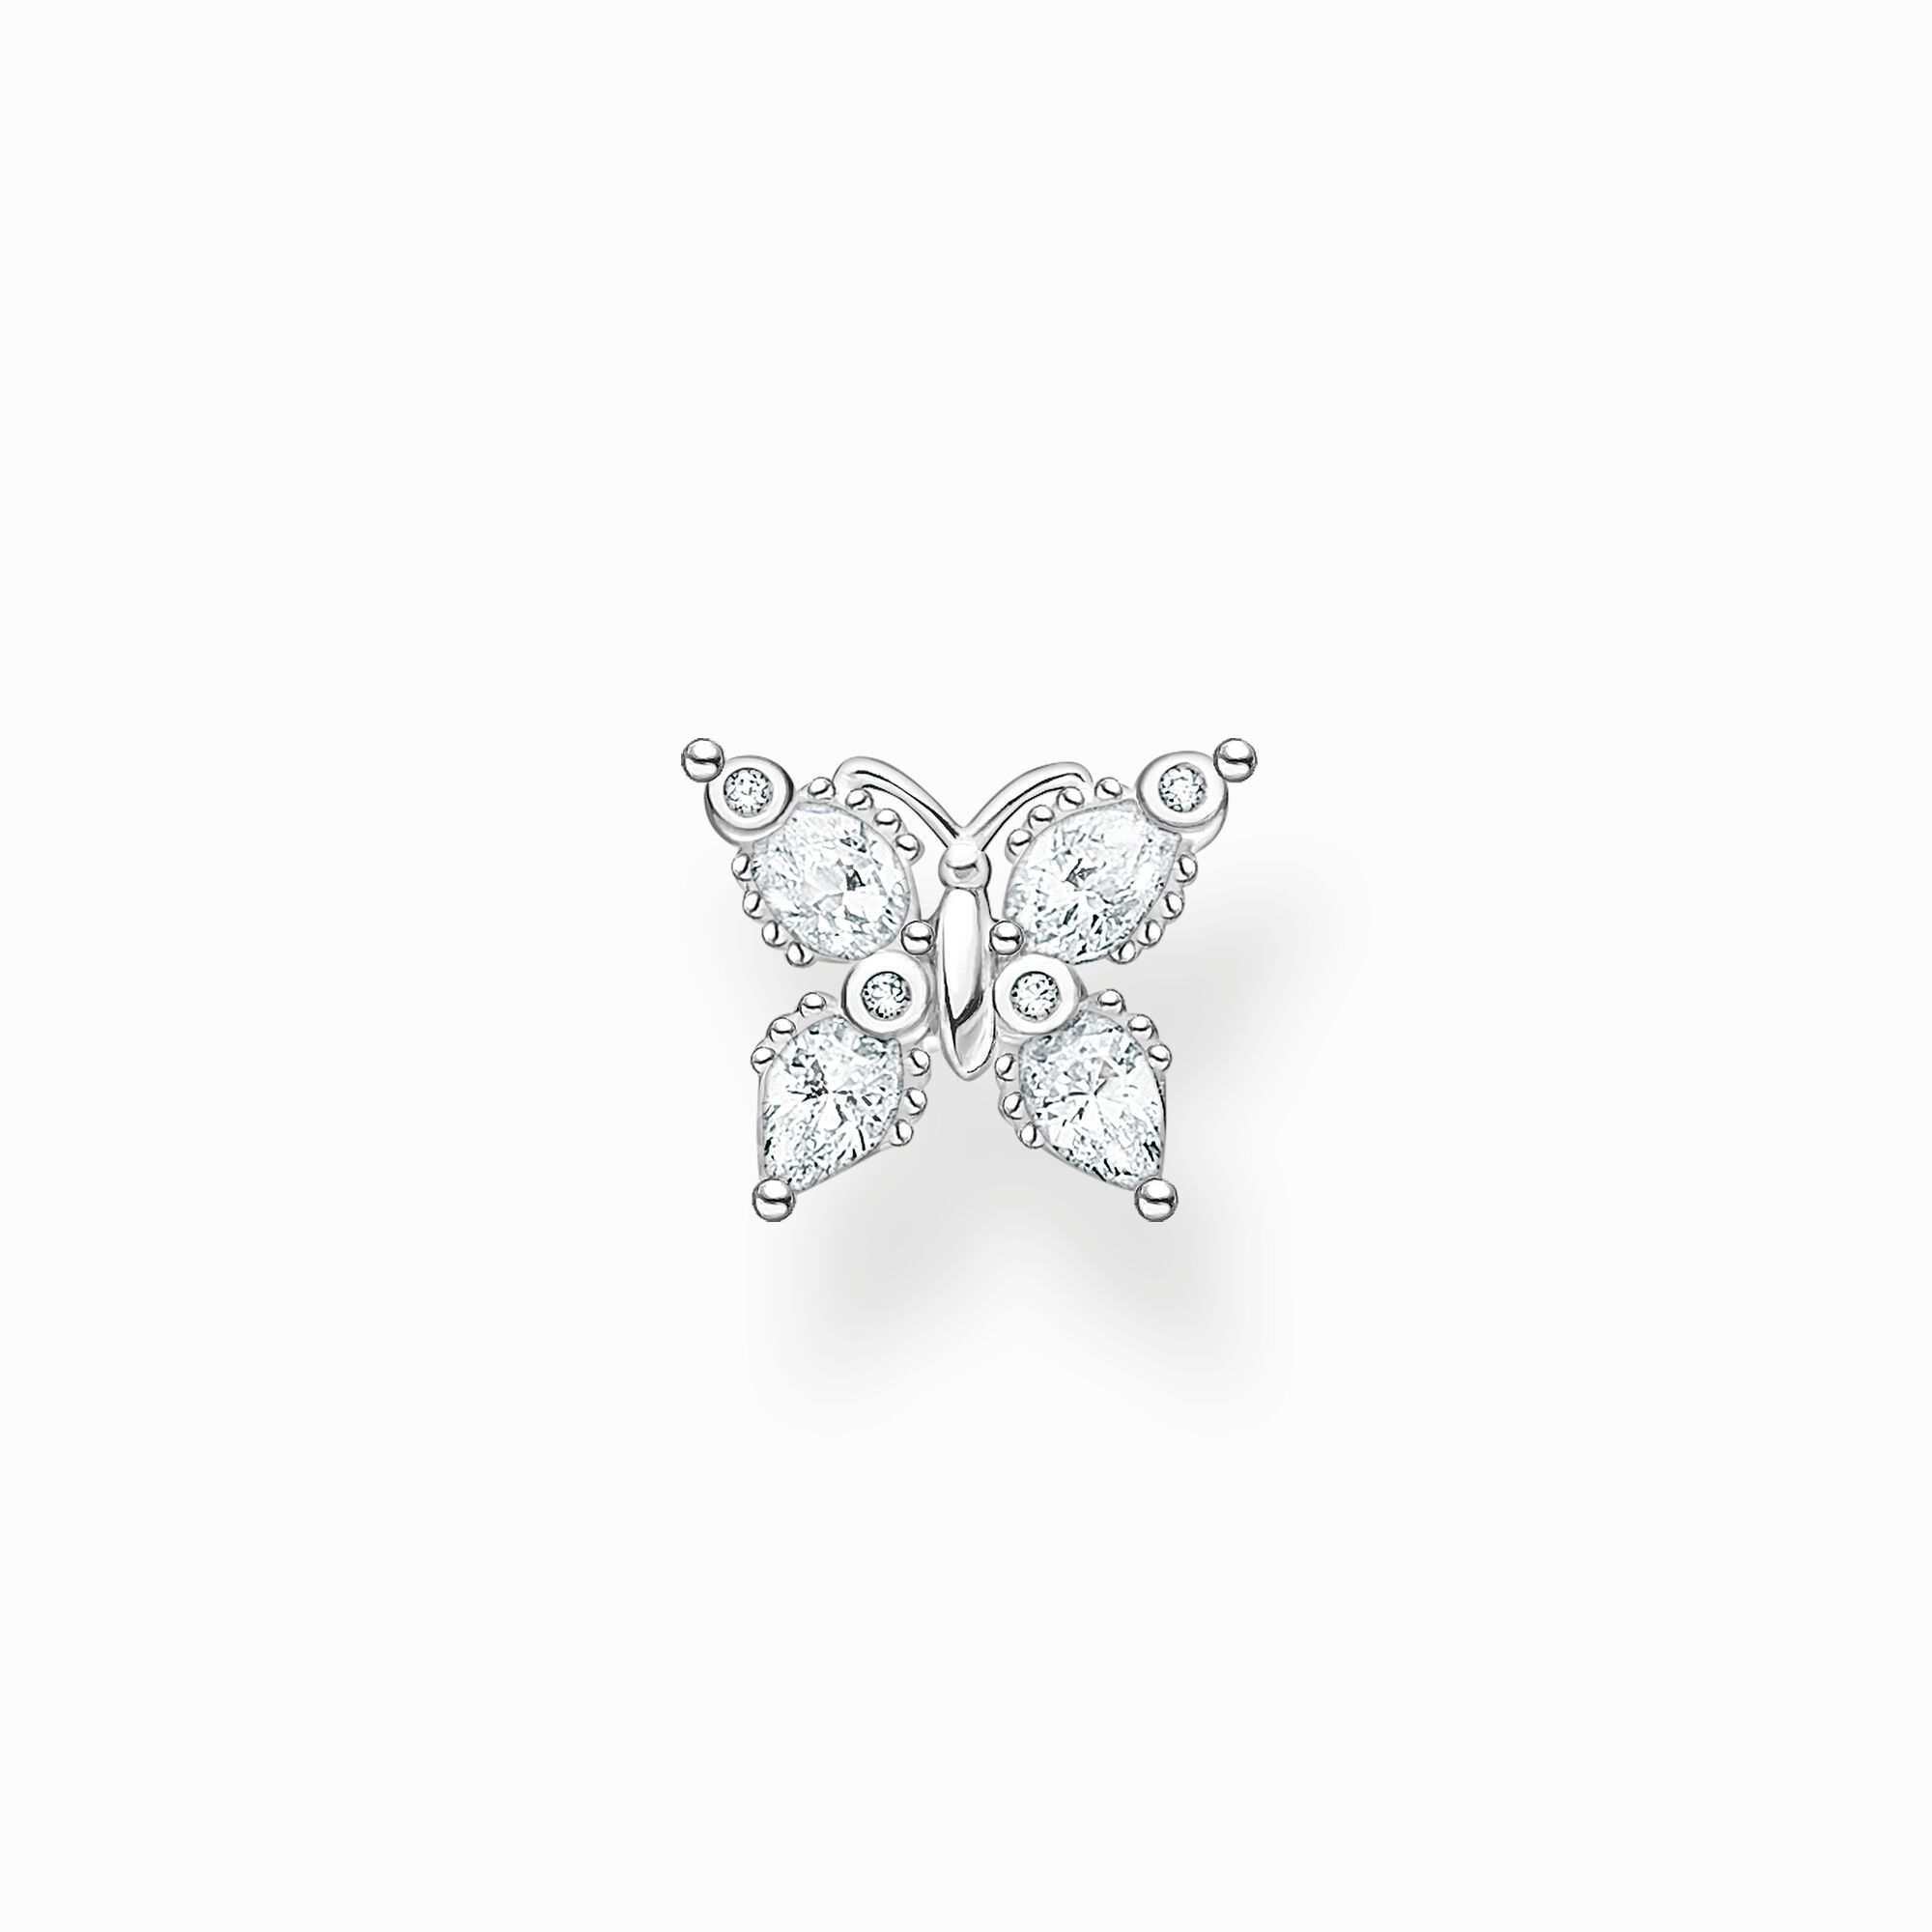 Single ear stud butterfly white stones from the Charming Collection collection in the THOMAS SABO online store